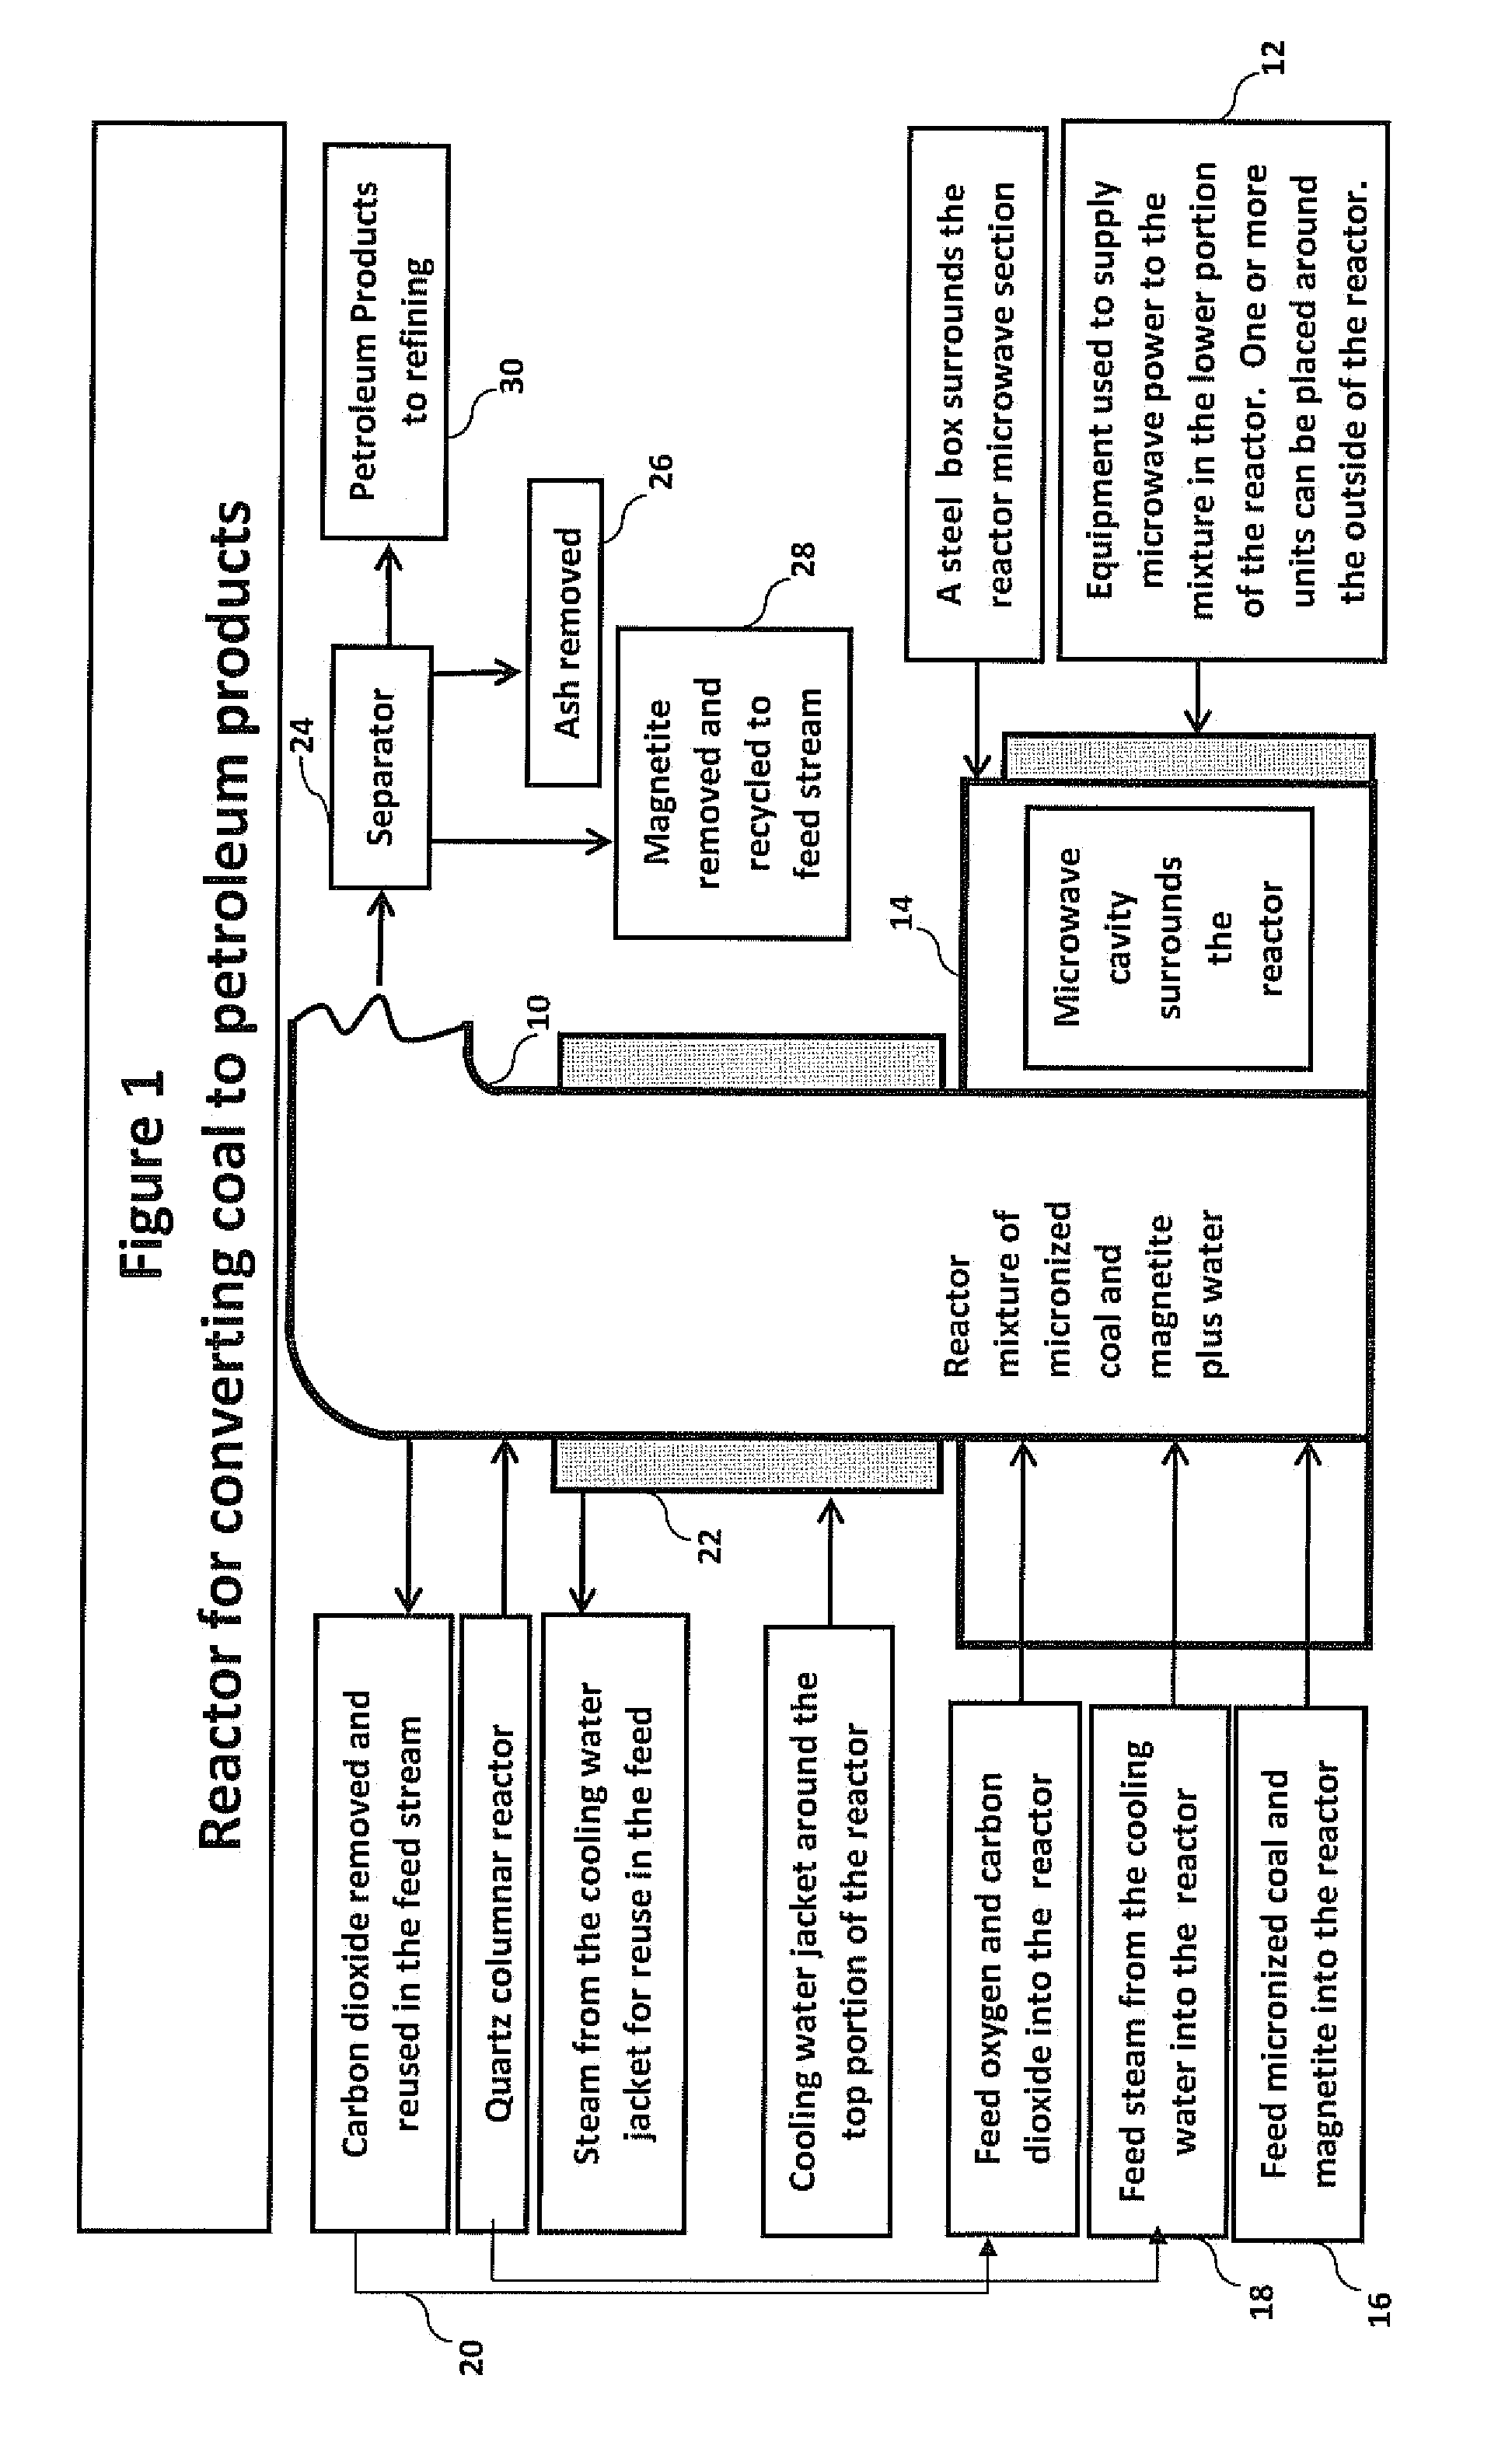 Method and apparatus for producing liquid hydrocarbon fuels from coal